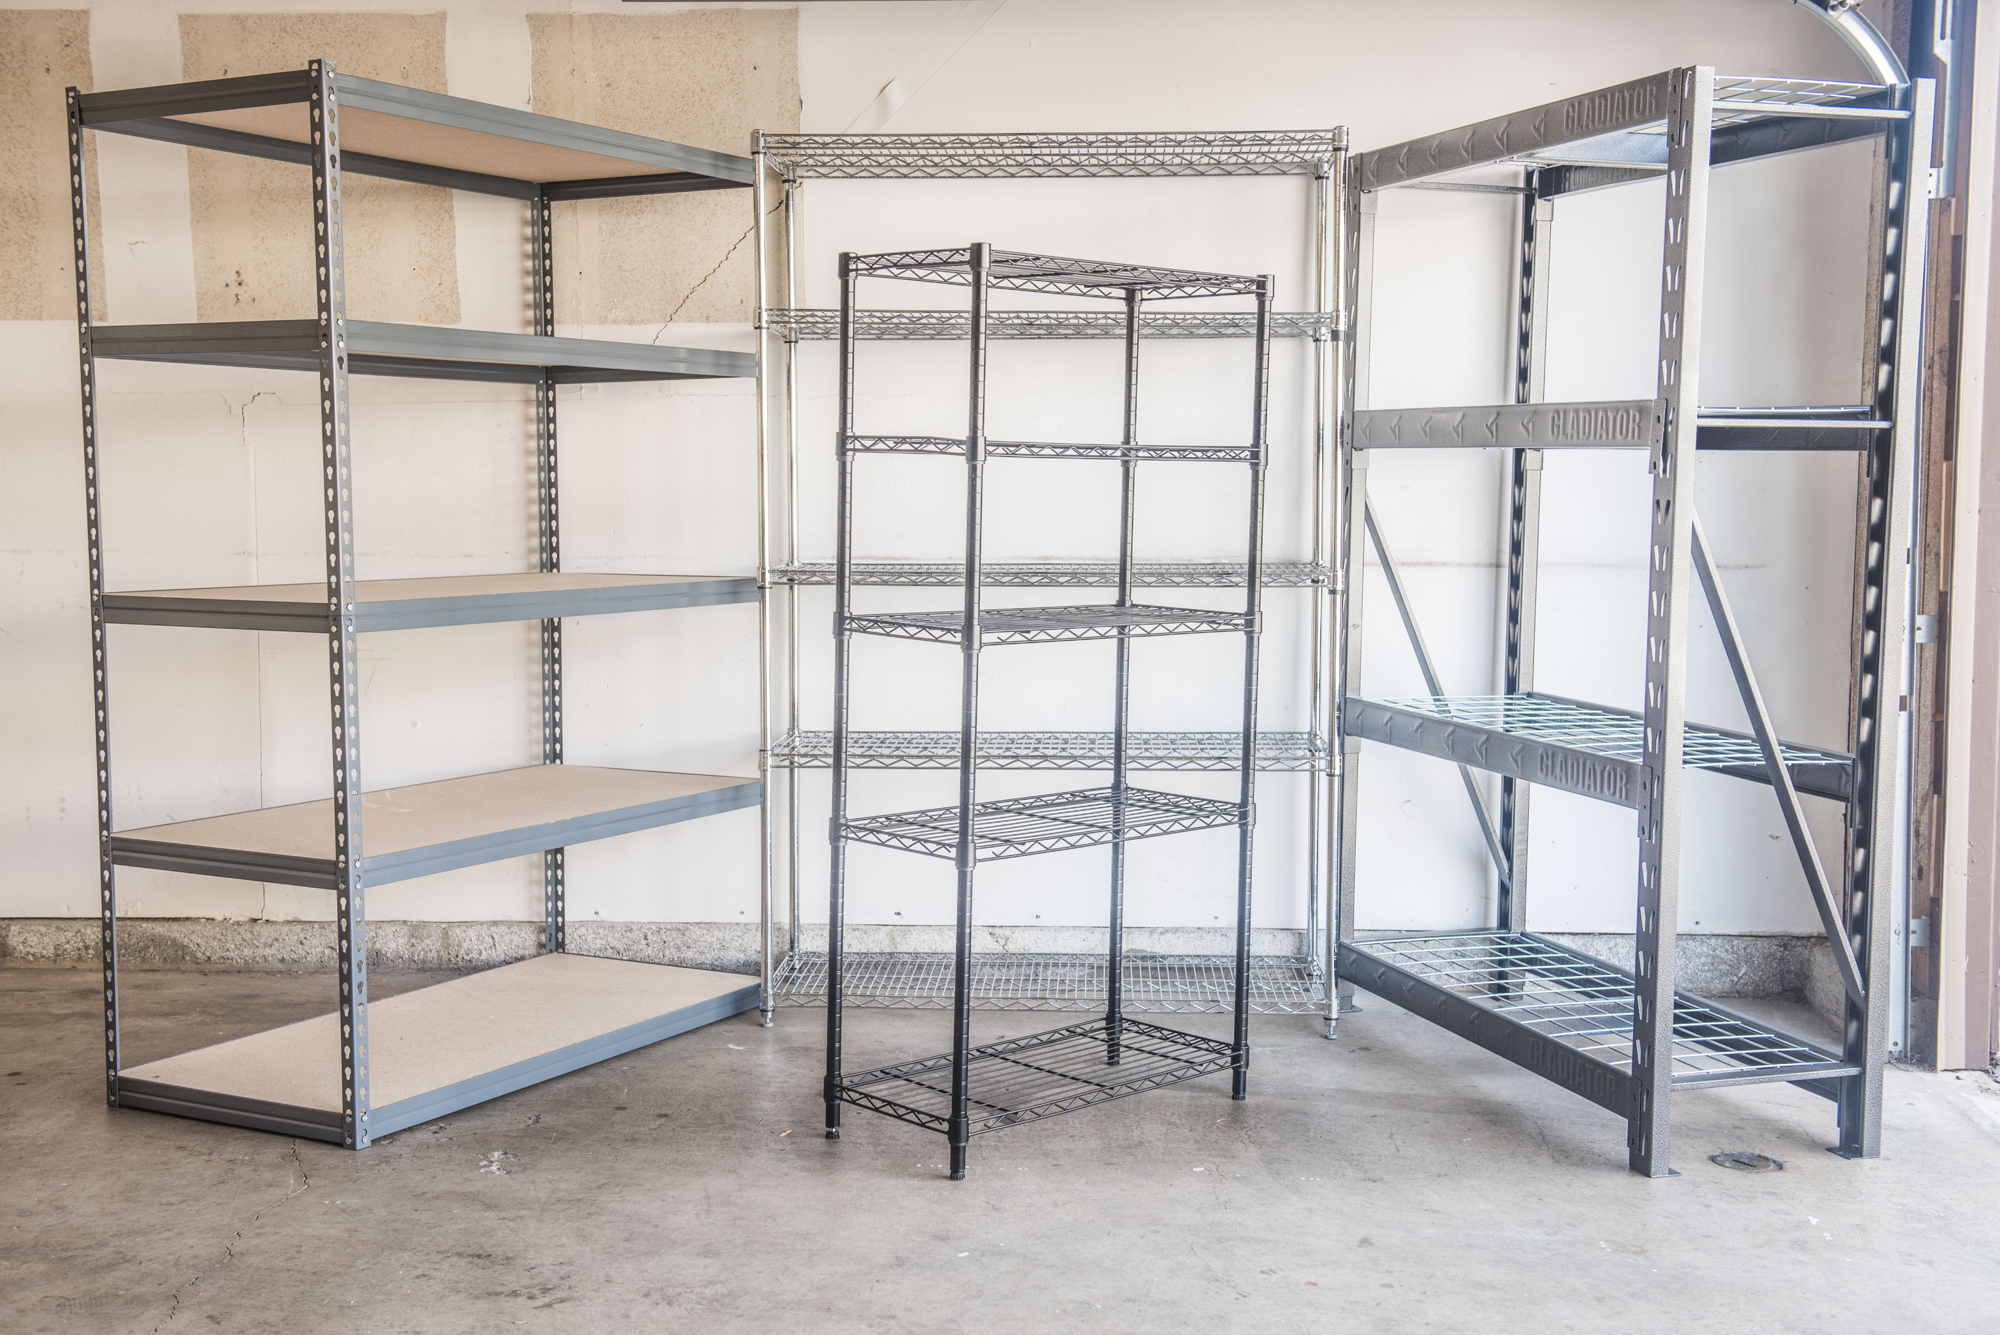 The Best Garage Shelving Of 2022, What Is The Best Garage Shelving